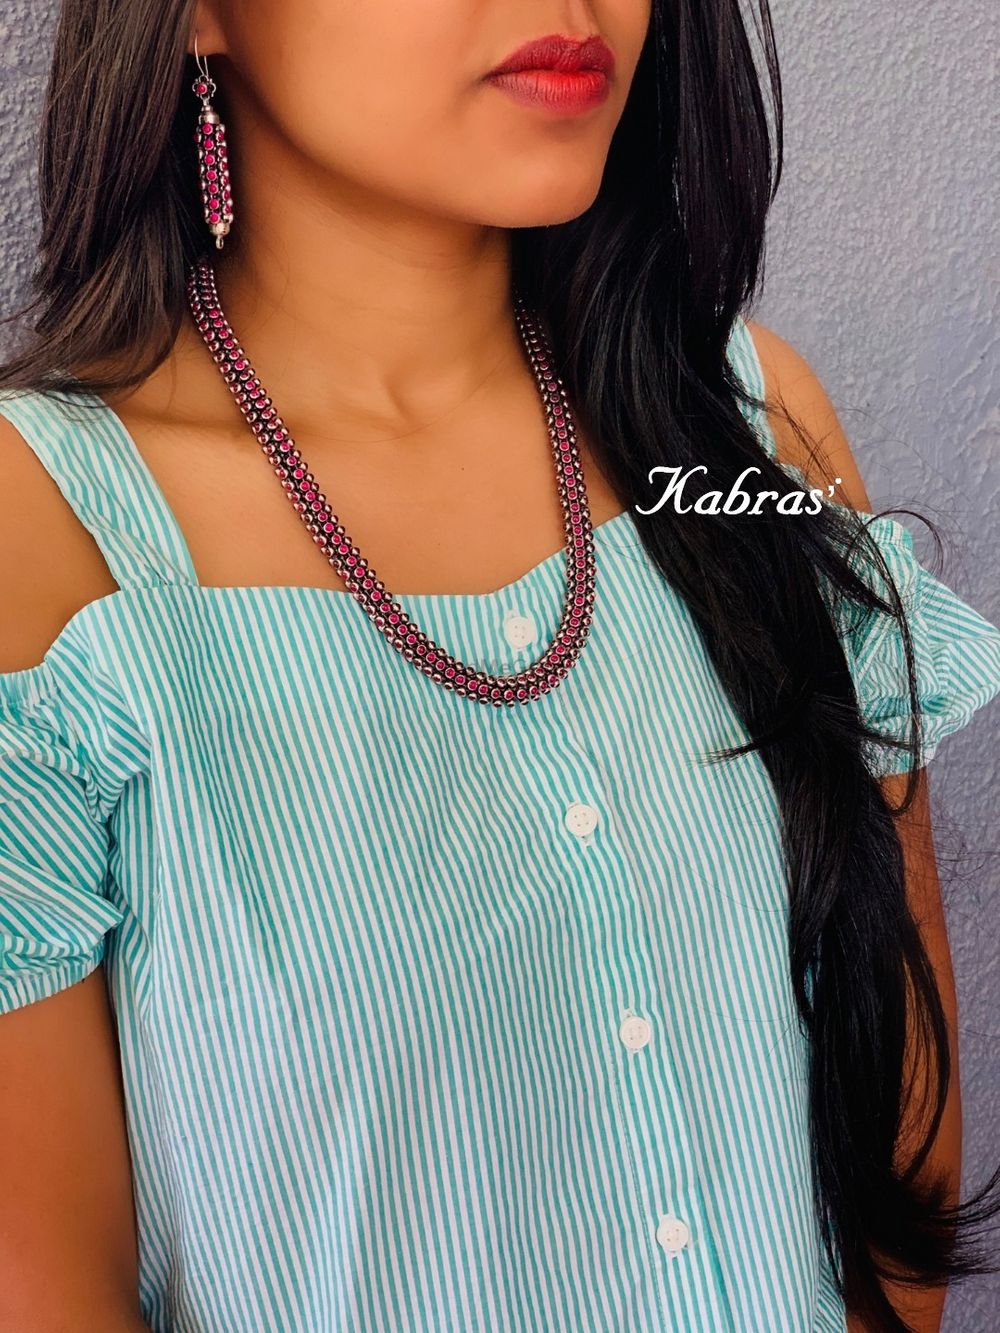 Photo From Silver Necklaces - By Kabras' Jewels